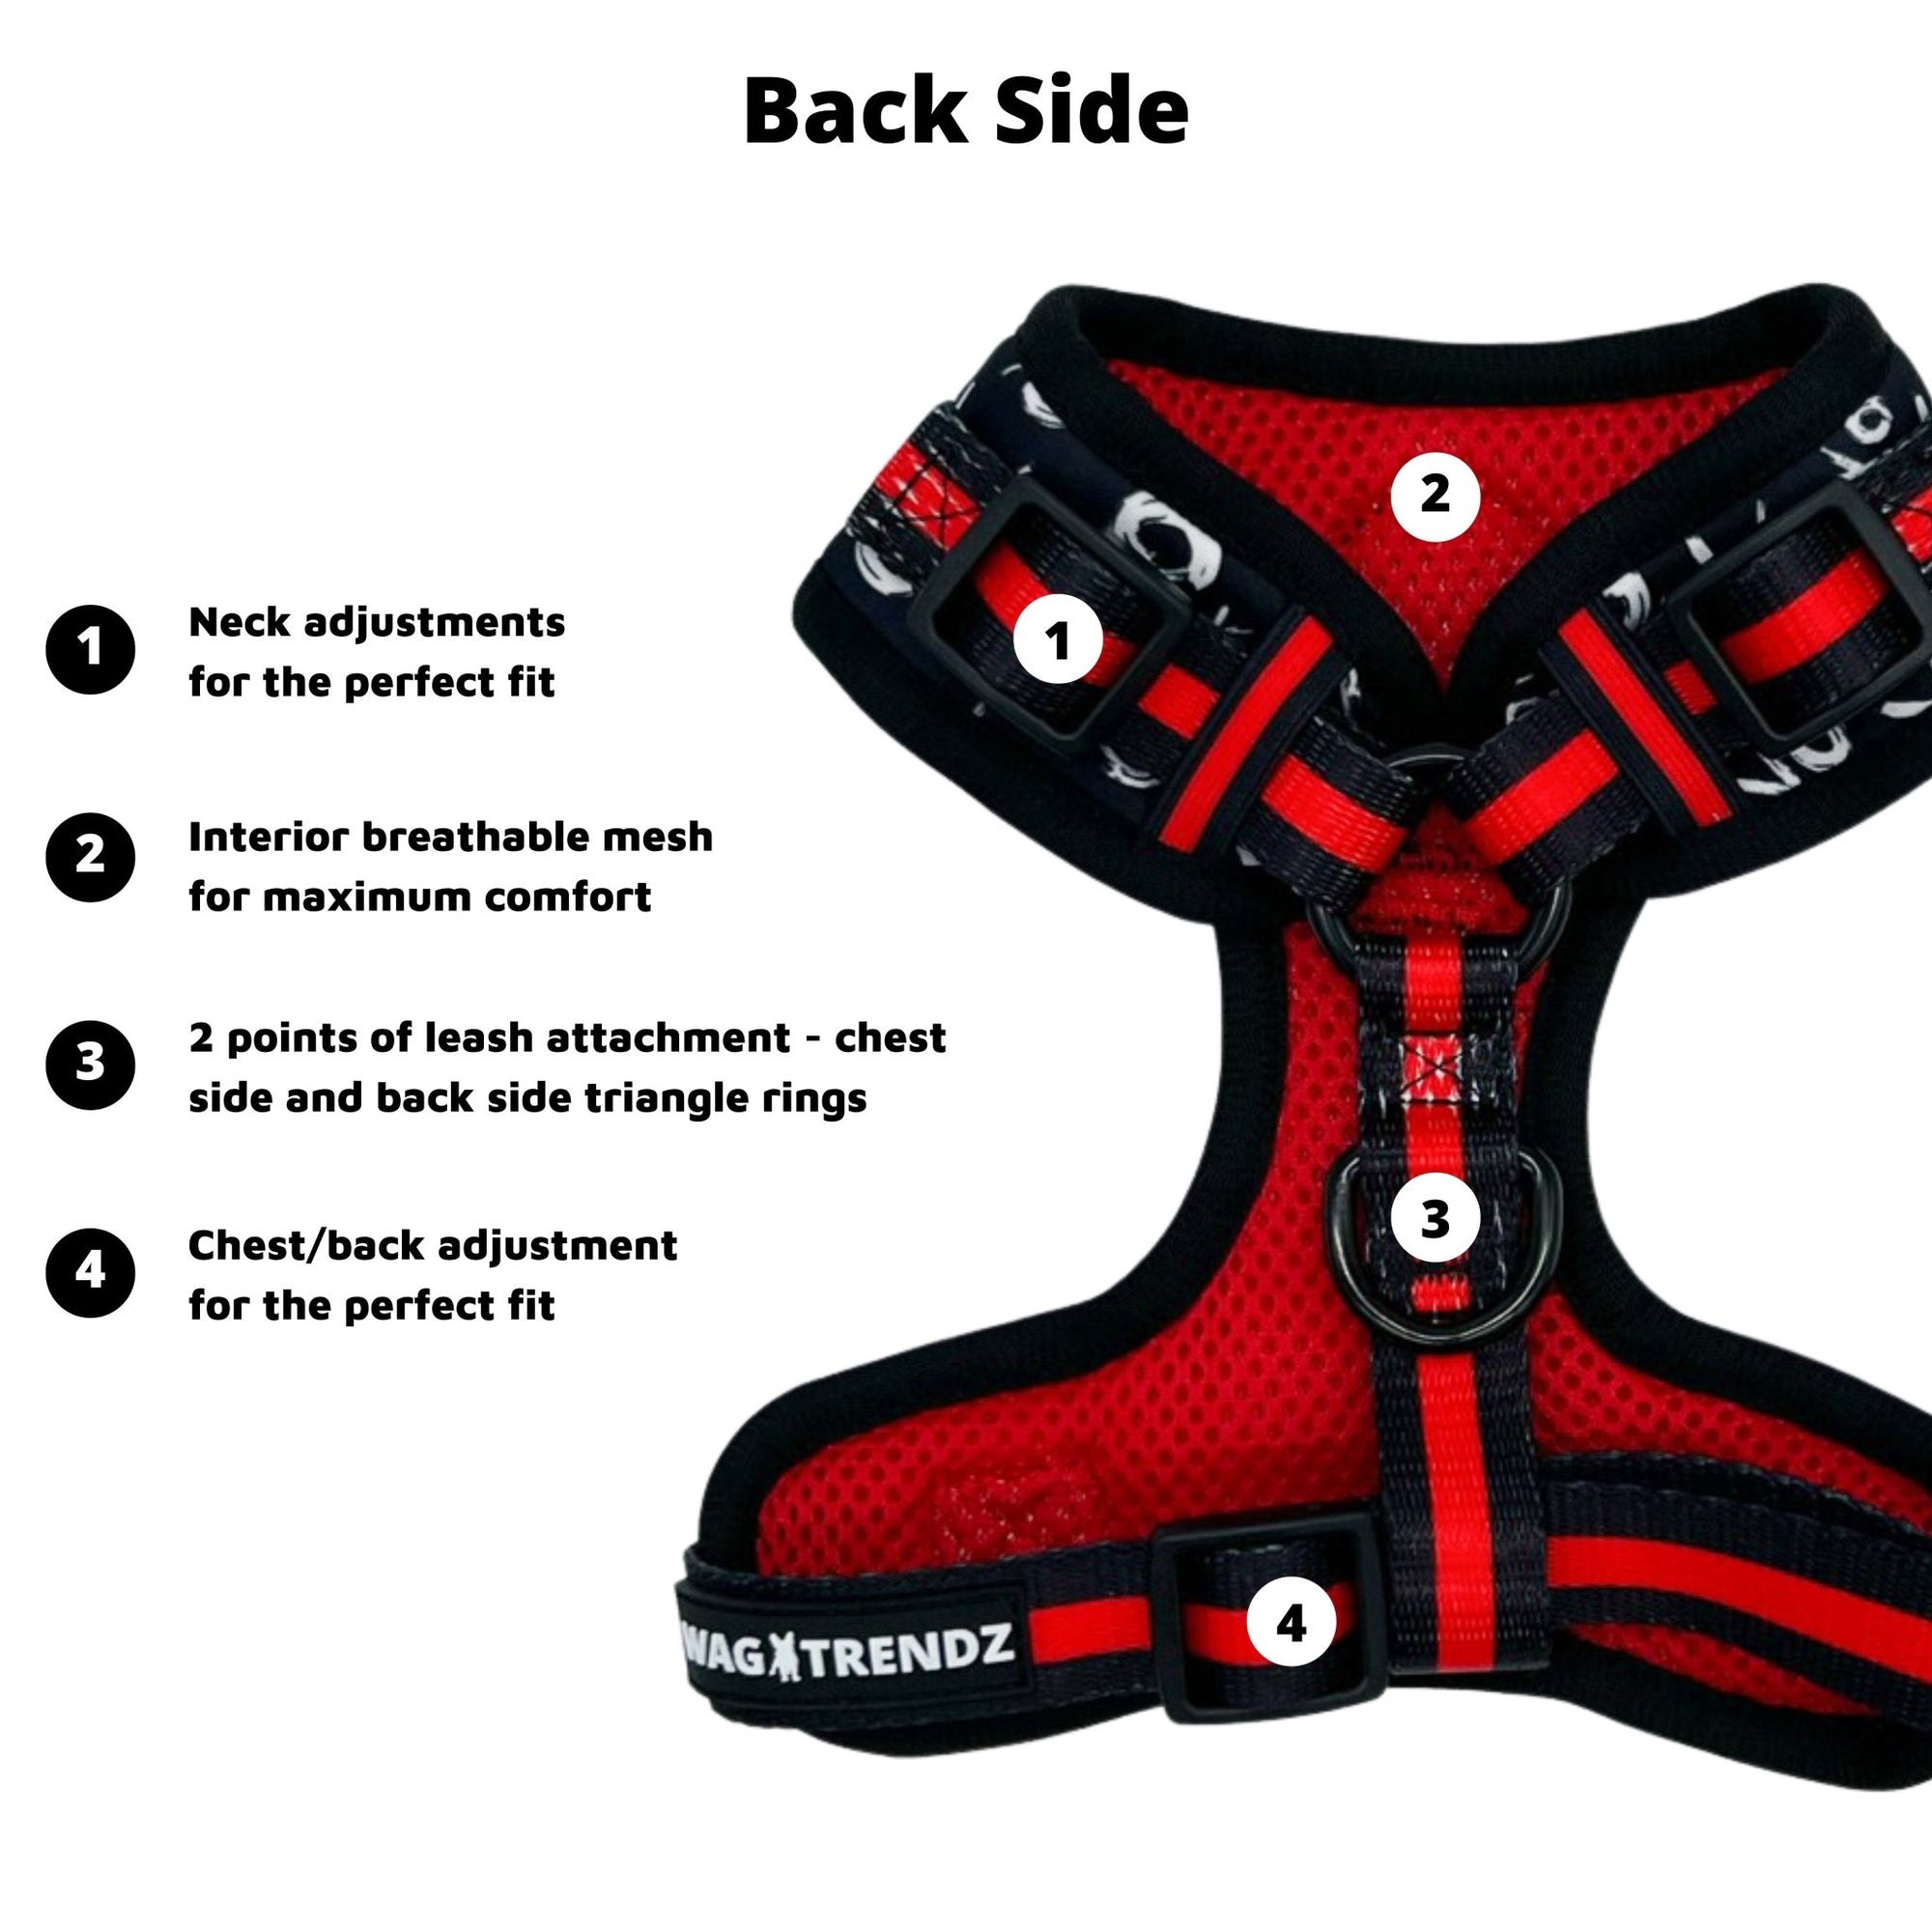 Dog Leash and Harness Set- Dog Harness Vest in black and white XO&#39;s with bold red accents - product feature captions - back side - against solid white background - Wag Trendz